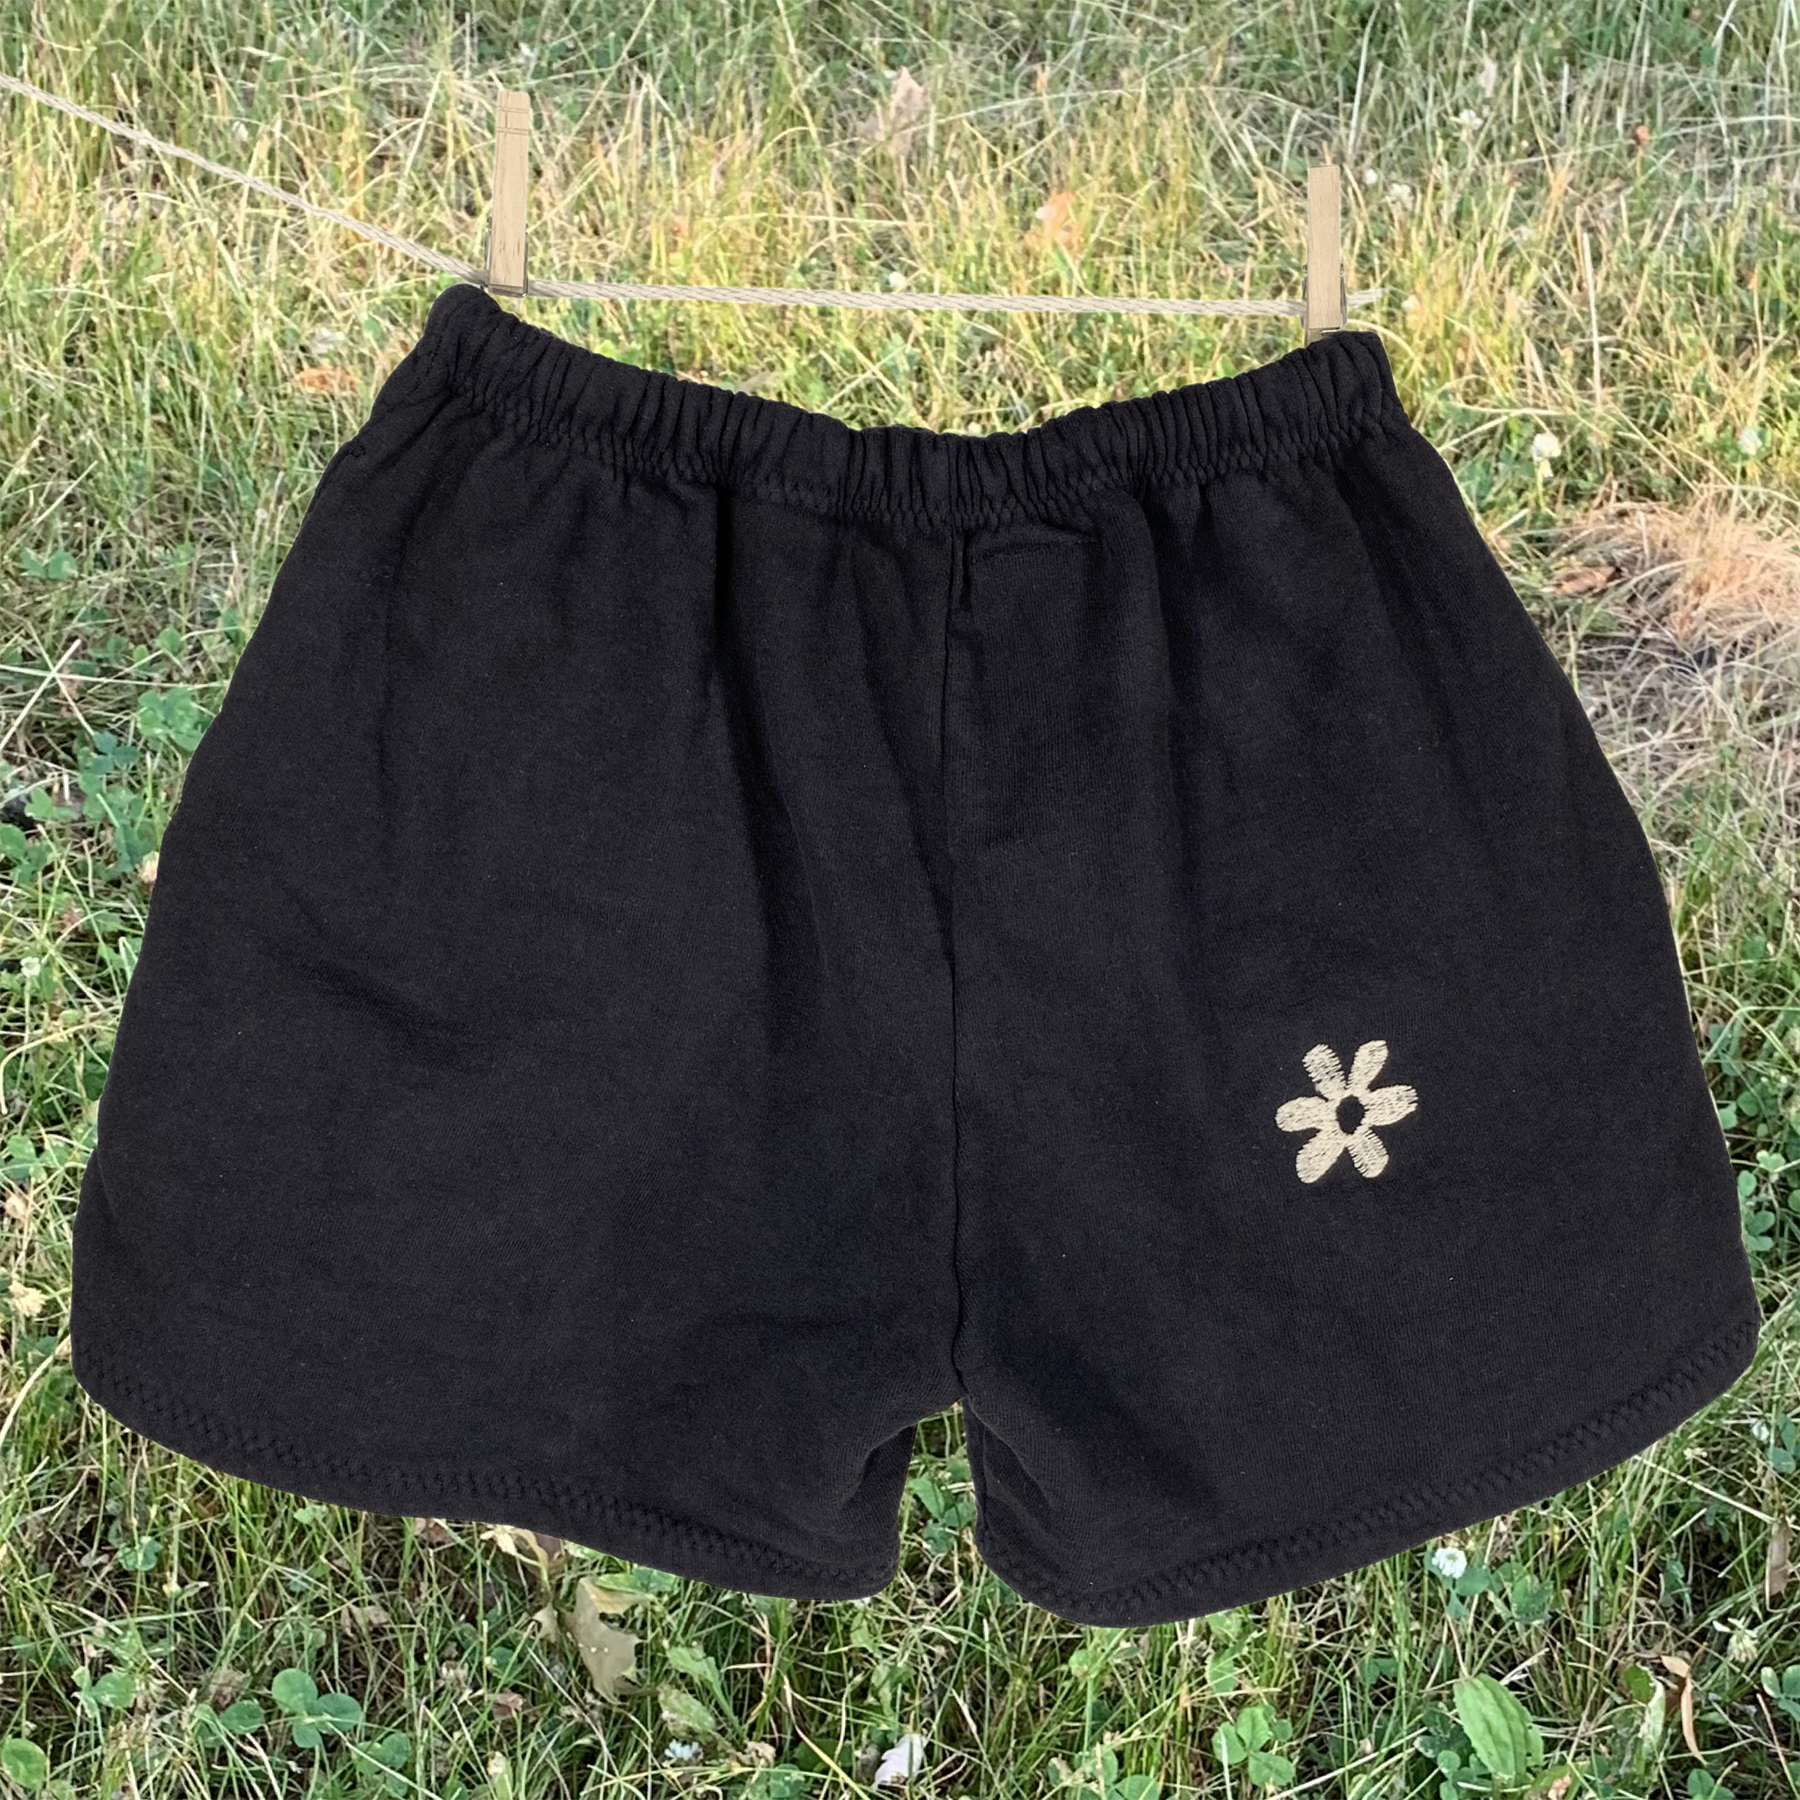 Home sewn embroidered shorts - S